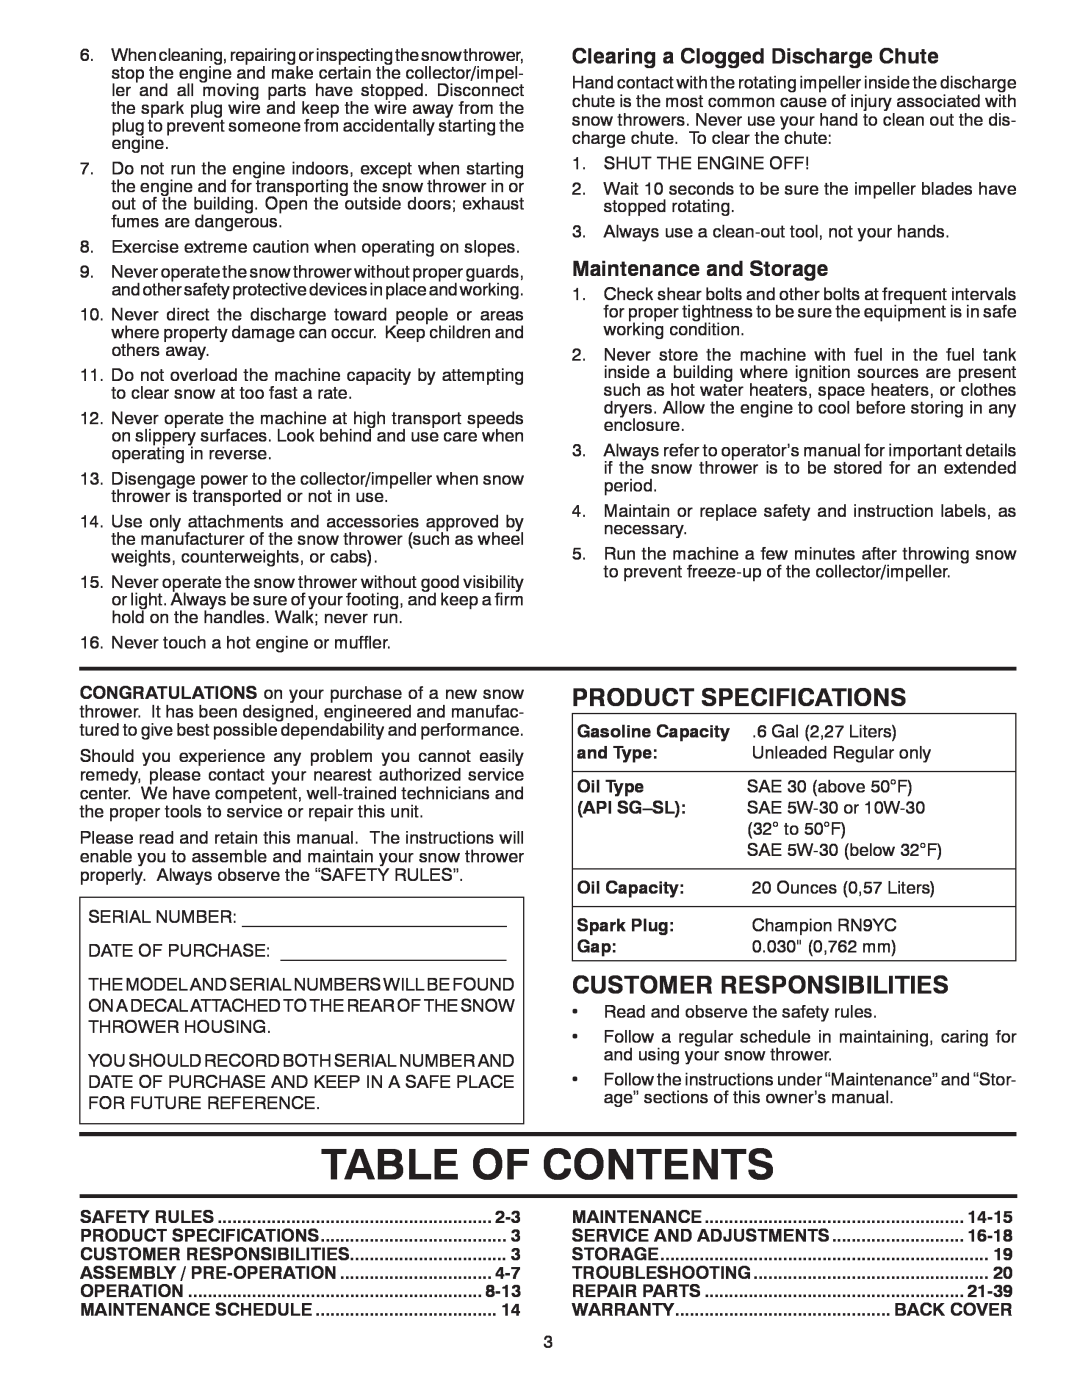 Poulan 435564 Table Of Contents, Product Specifications, Customer Responsibilities, Clearing a Clogged Discharge Chute 